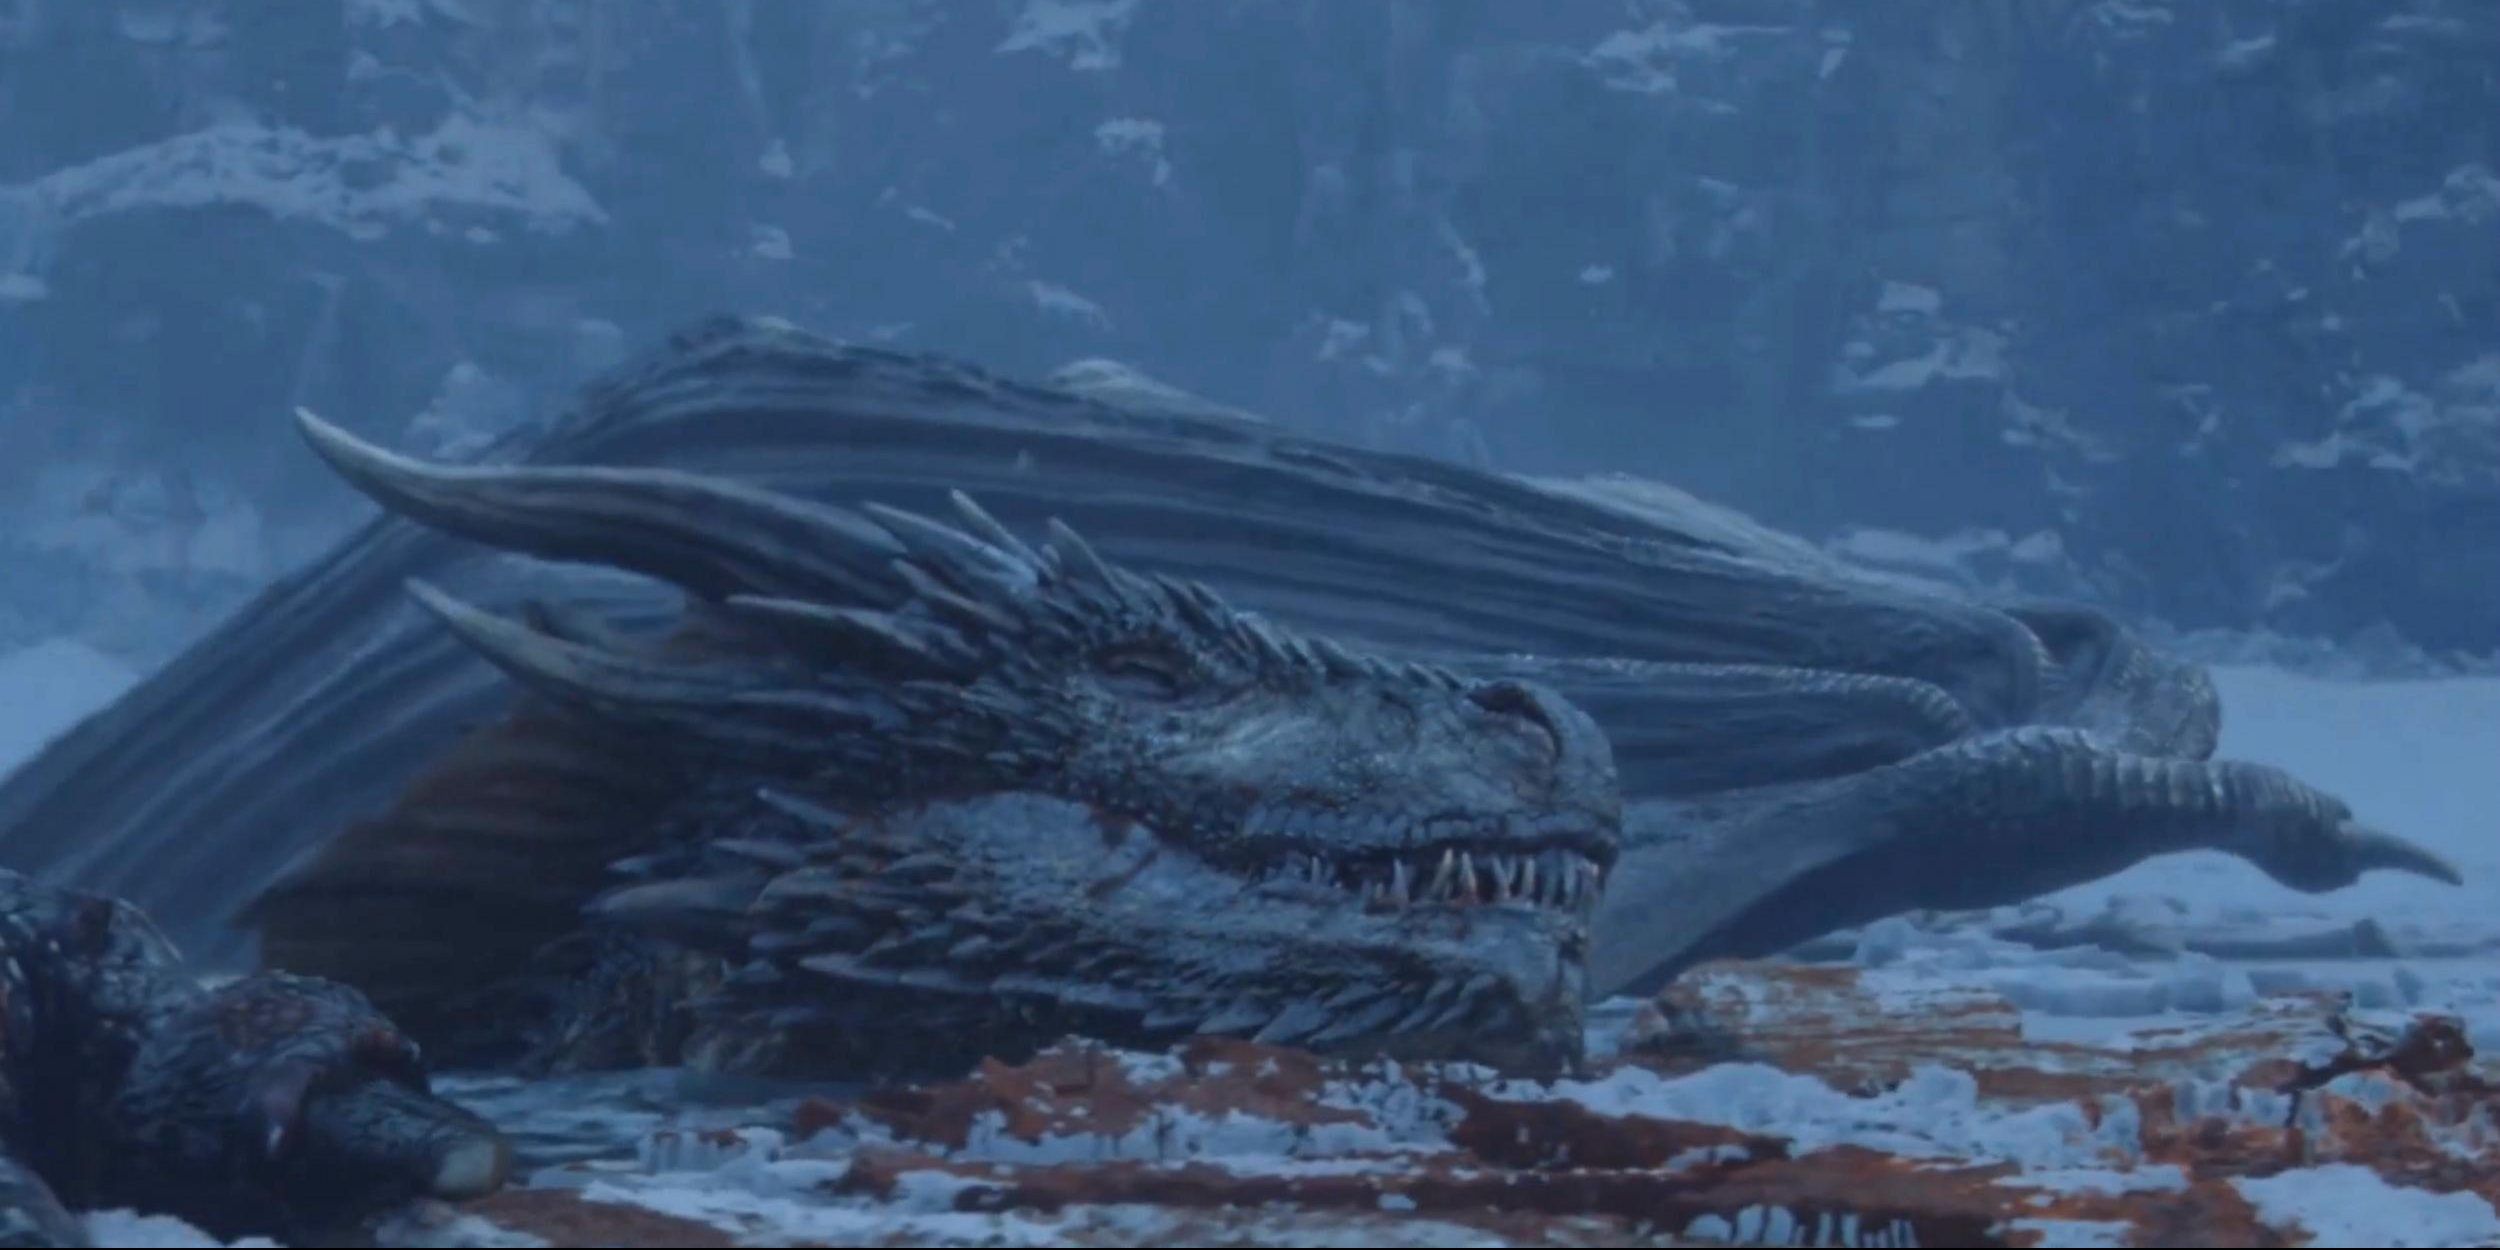 Viserion's death beyond the Wall